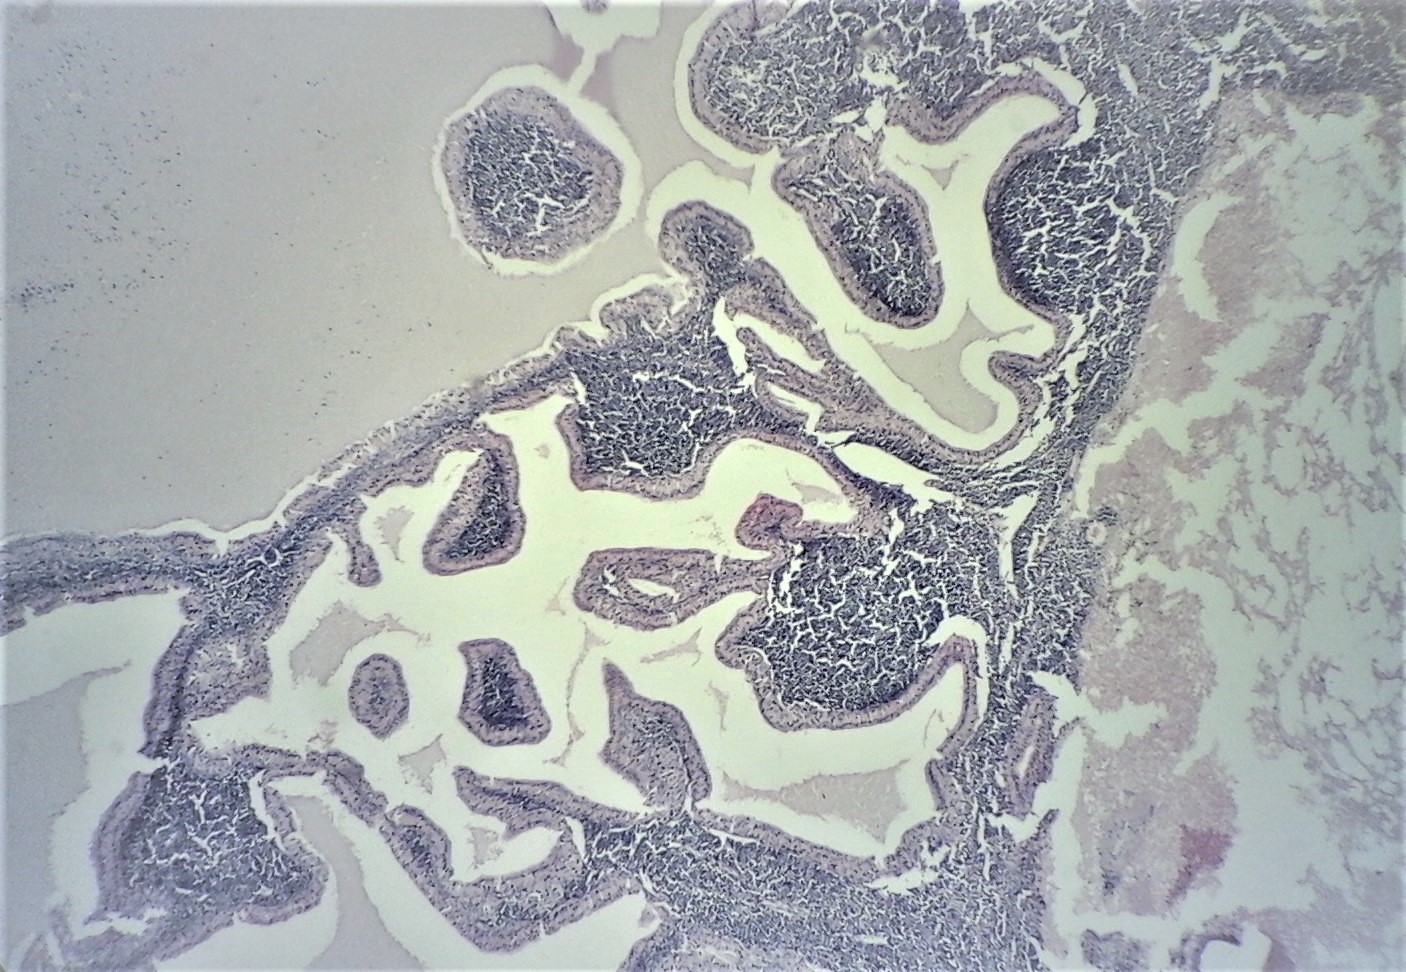 Figure 1:
Warthin tumor composed of glandular, cystic and papillary structures lined by oncocytic epithelial cells. There is a dense population of lymphocytes in the stroma, (Hematoxylin and eosin, x 40).
